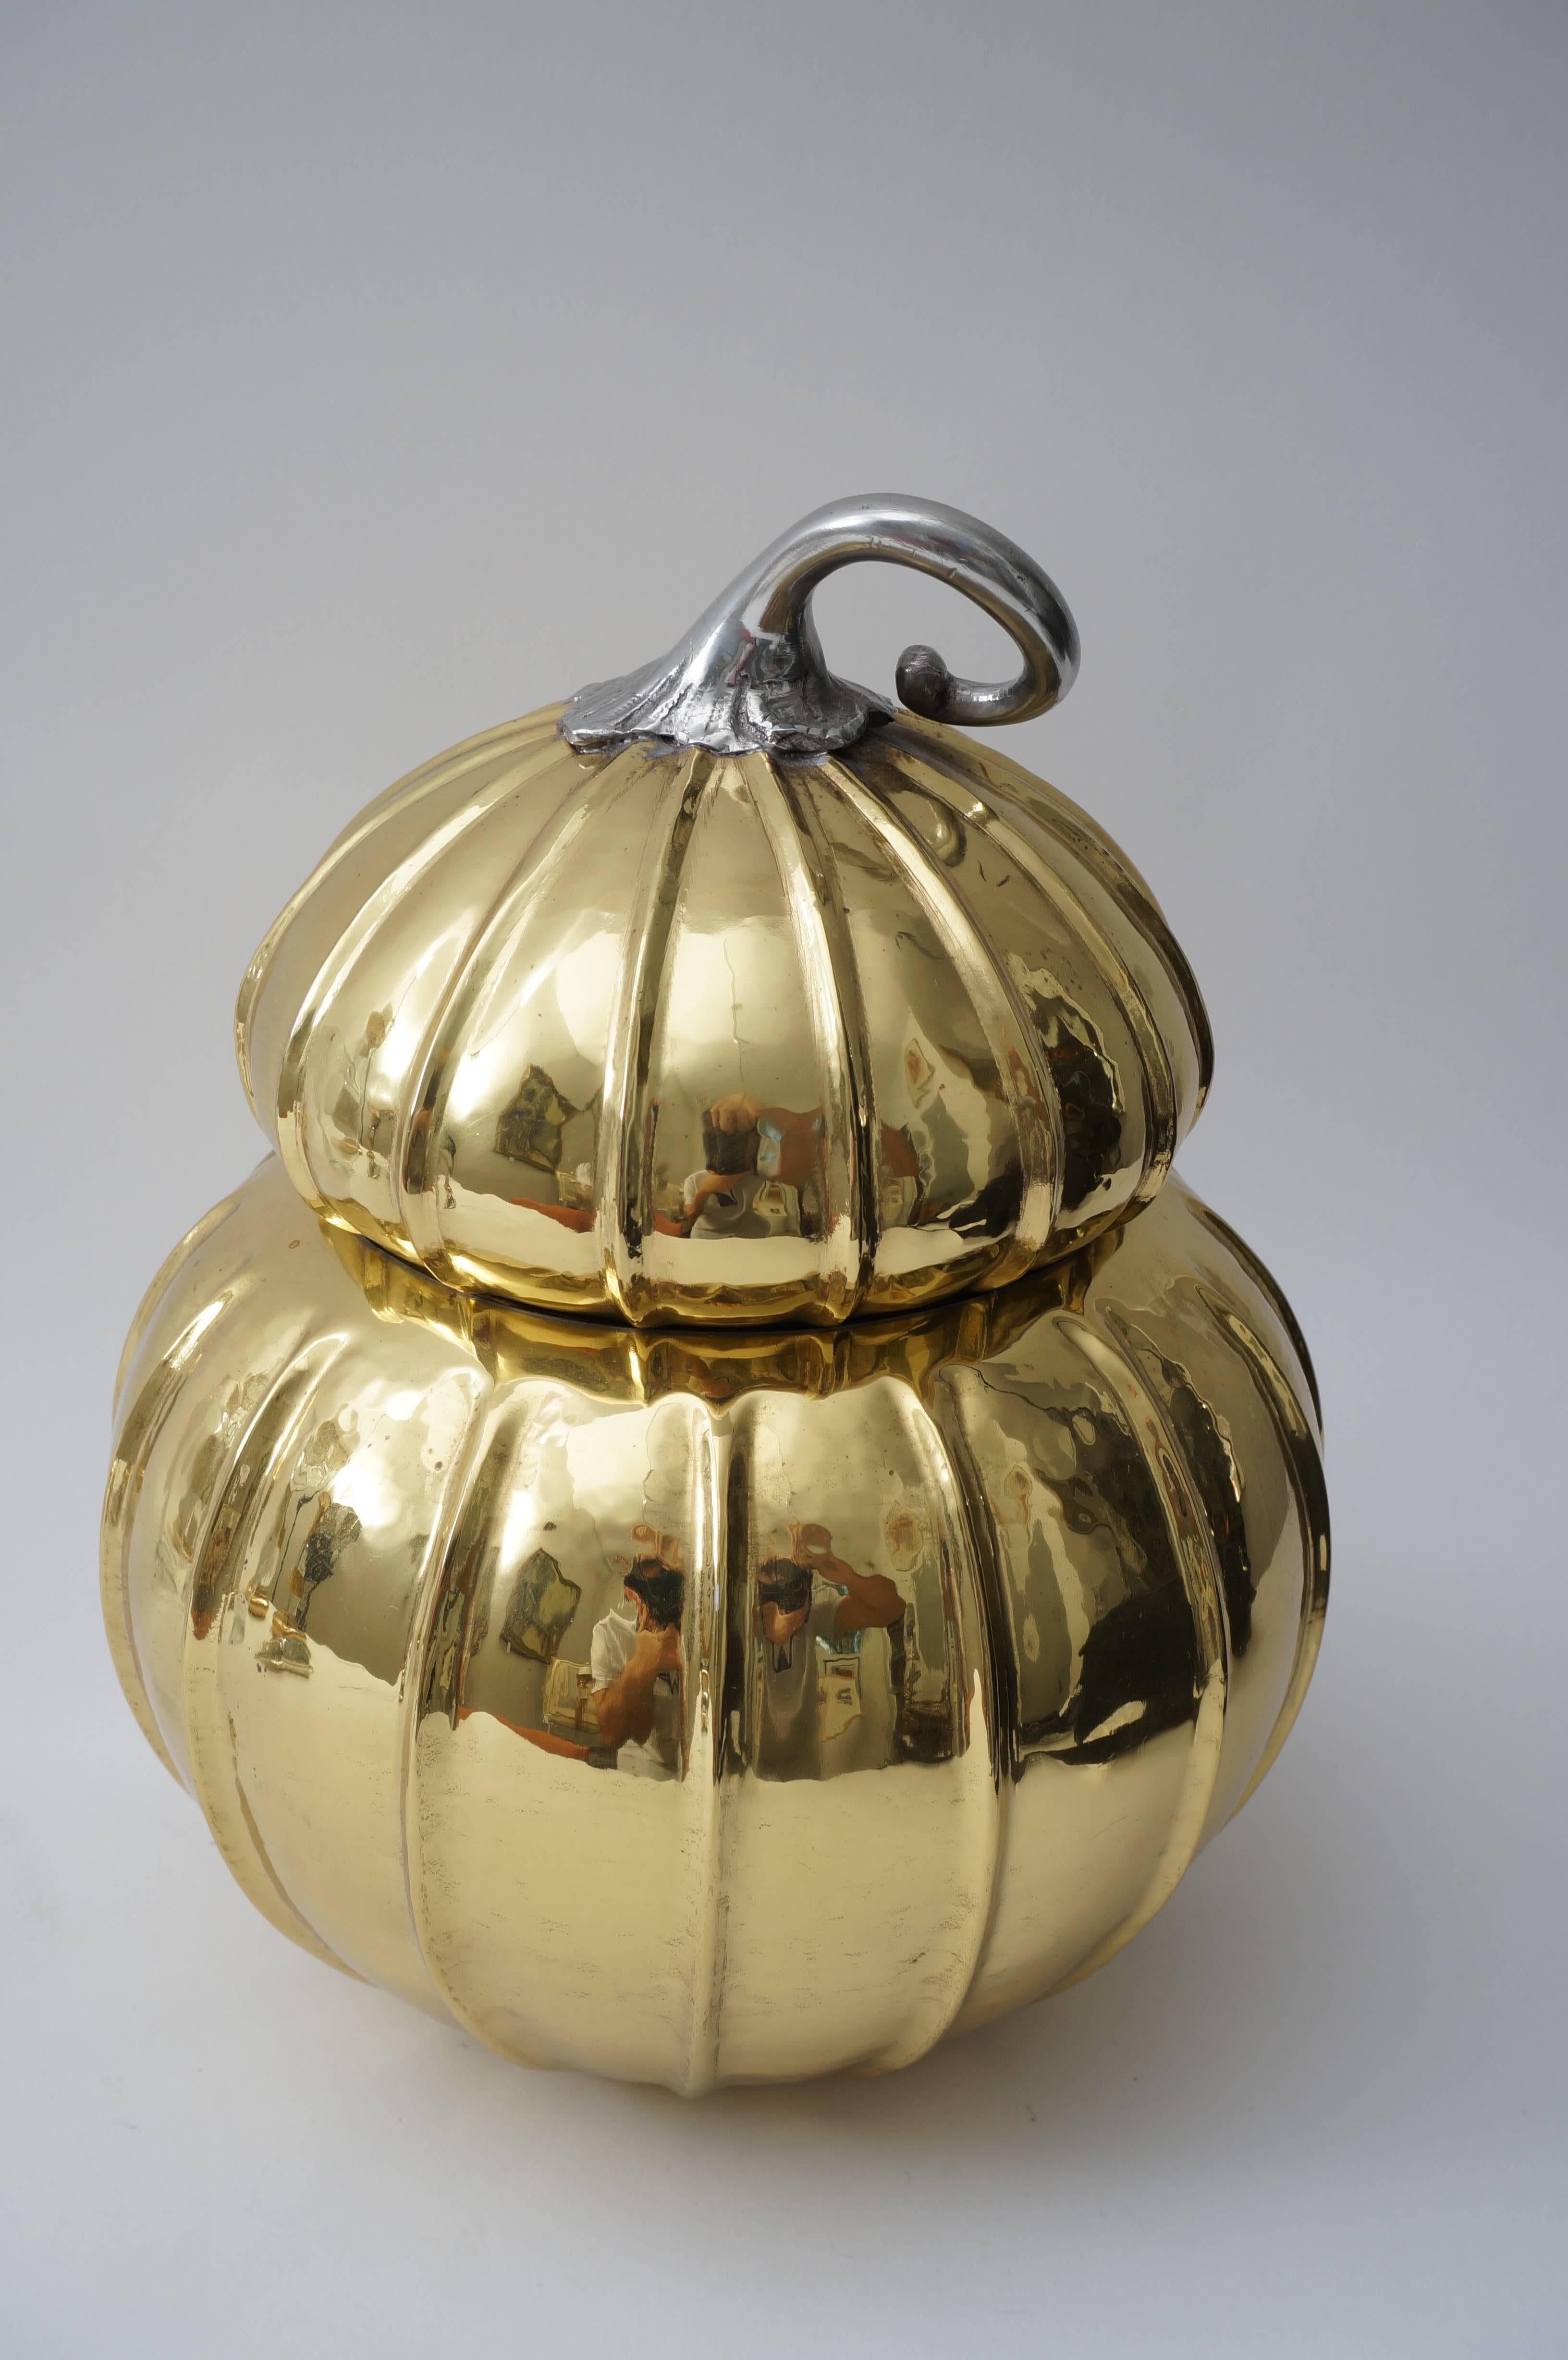 Hollywood Regency Melon-Form Ice Bucket Brass and Silver Plate